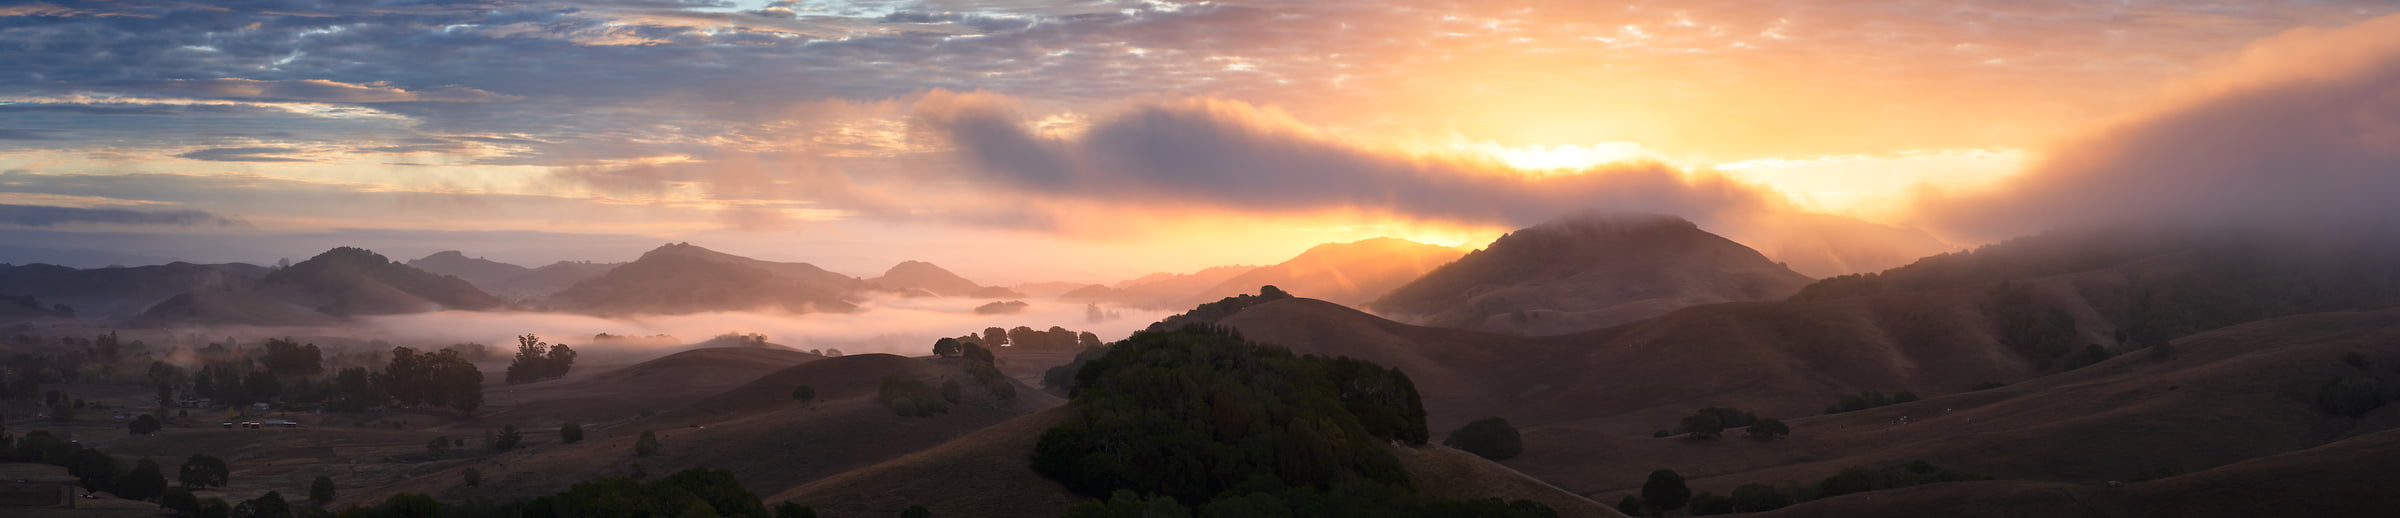 339 megapixels! A very high resolution, large-format VAST photo print of a sunrise landscape panorama; photograph created by Jeff Lewis in Petaluma, California